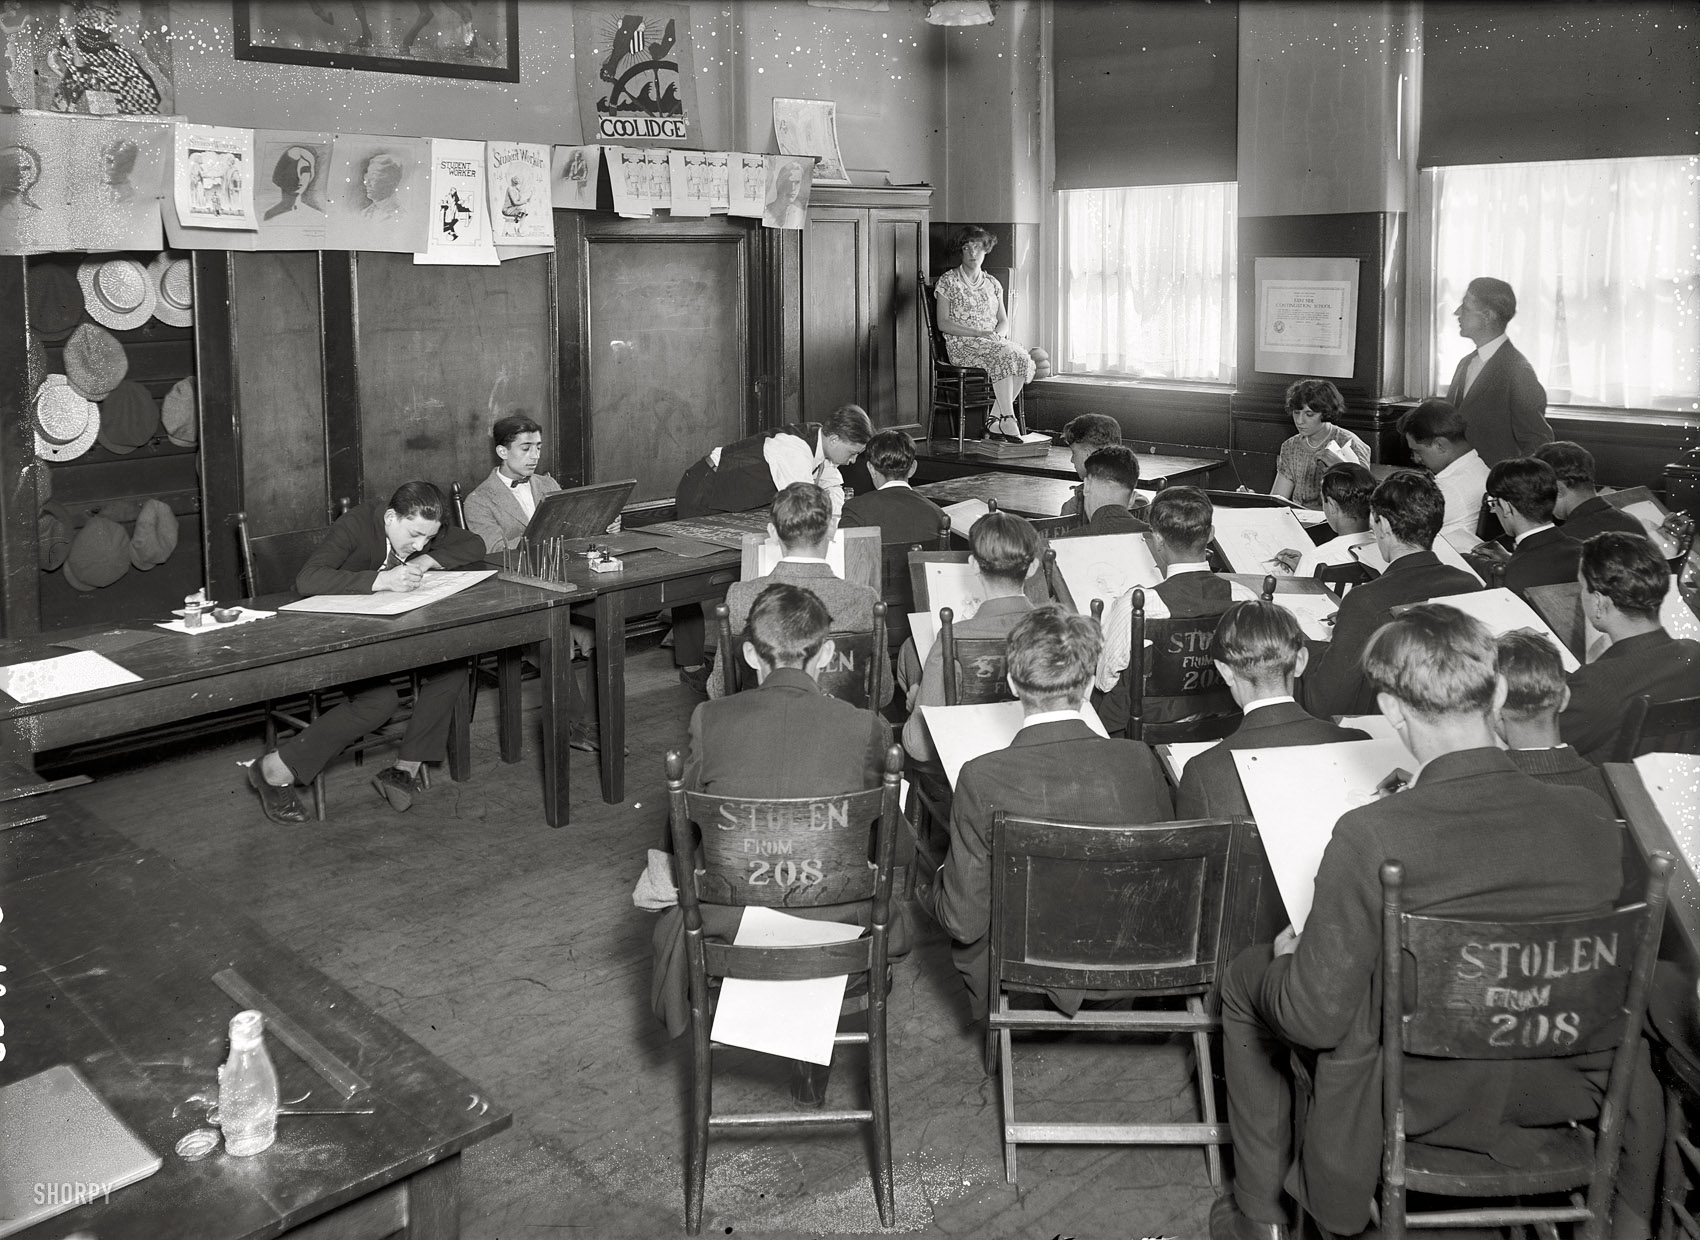 New York circa 1925. "Art Class (commercial)." The certificate or diploma on the wall bears the name of East Side Continuation School. View full size.